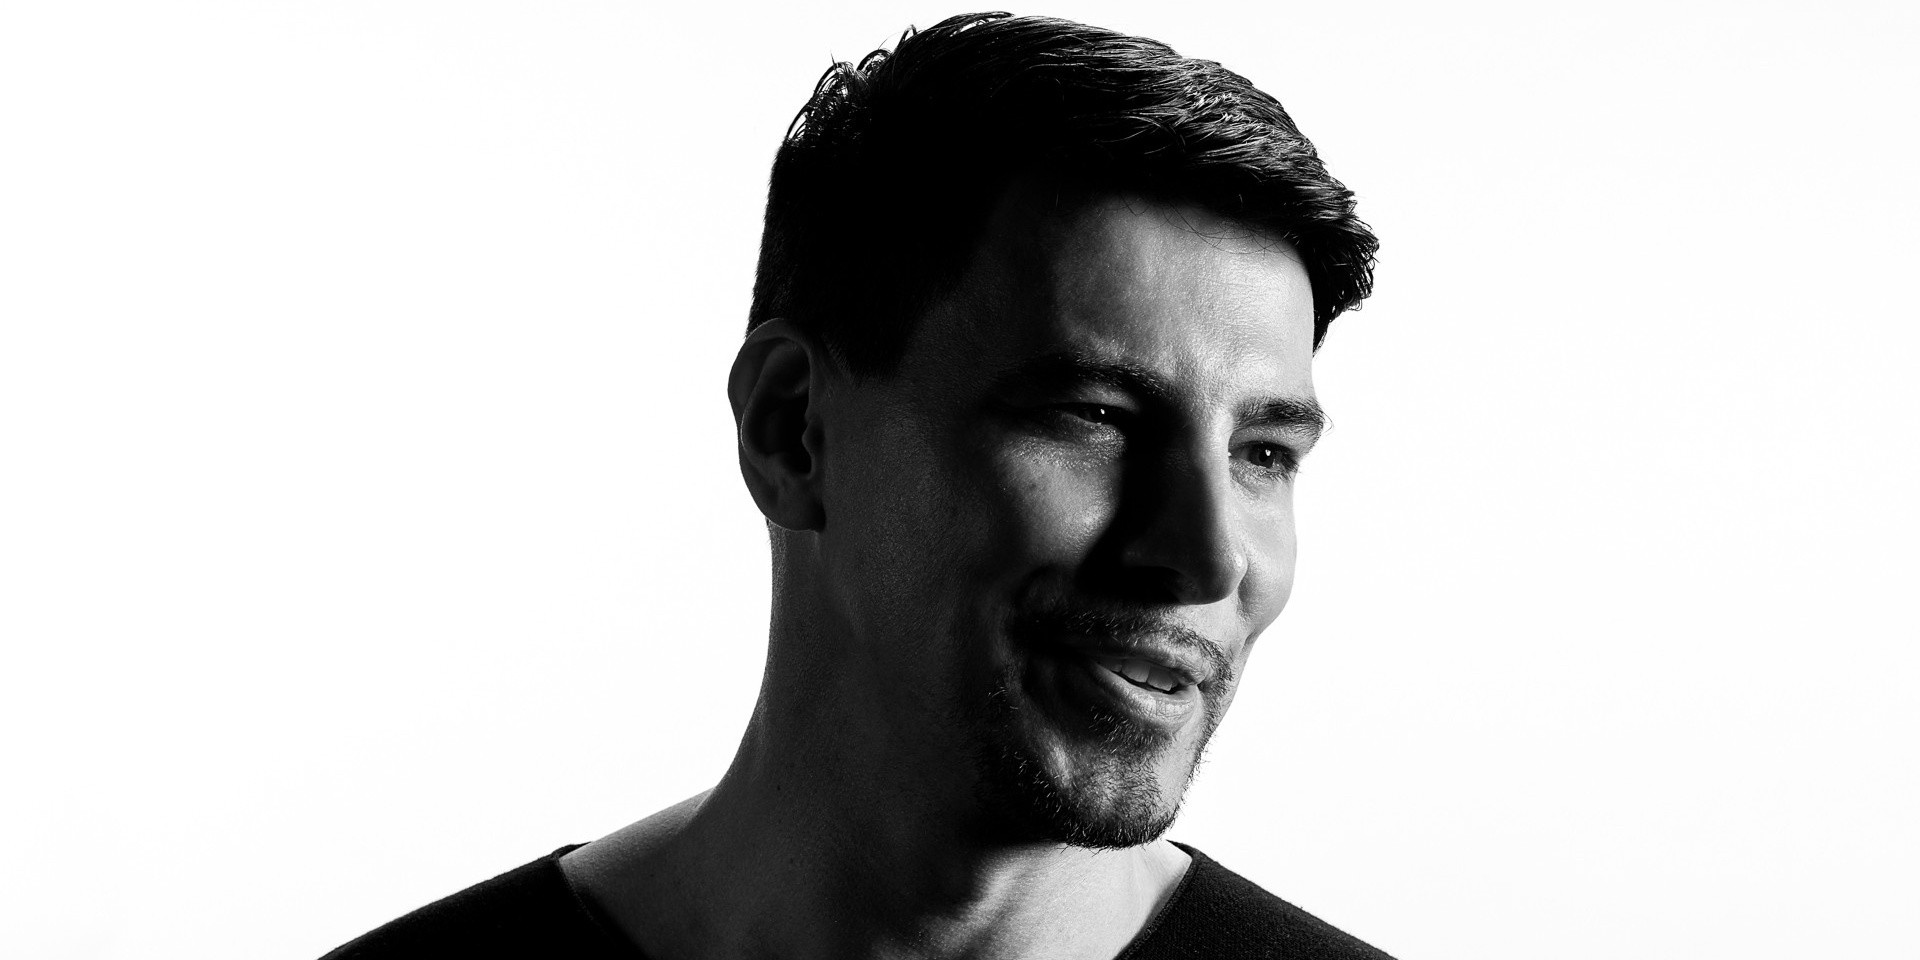 Progressive house icon Thomas Gold to perform in Singapore this October